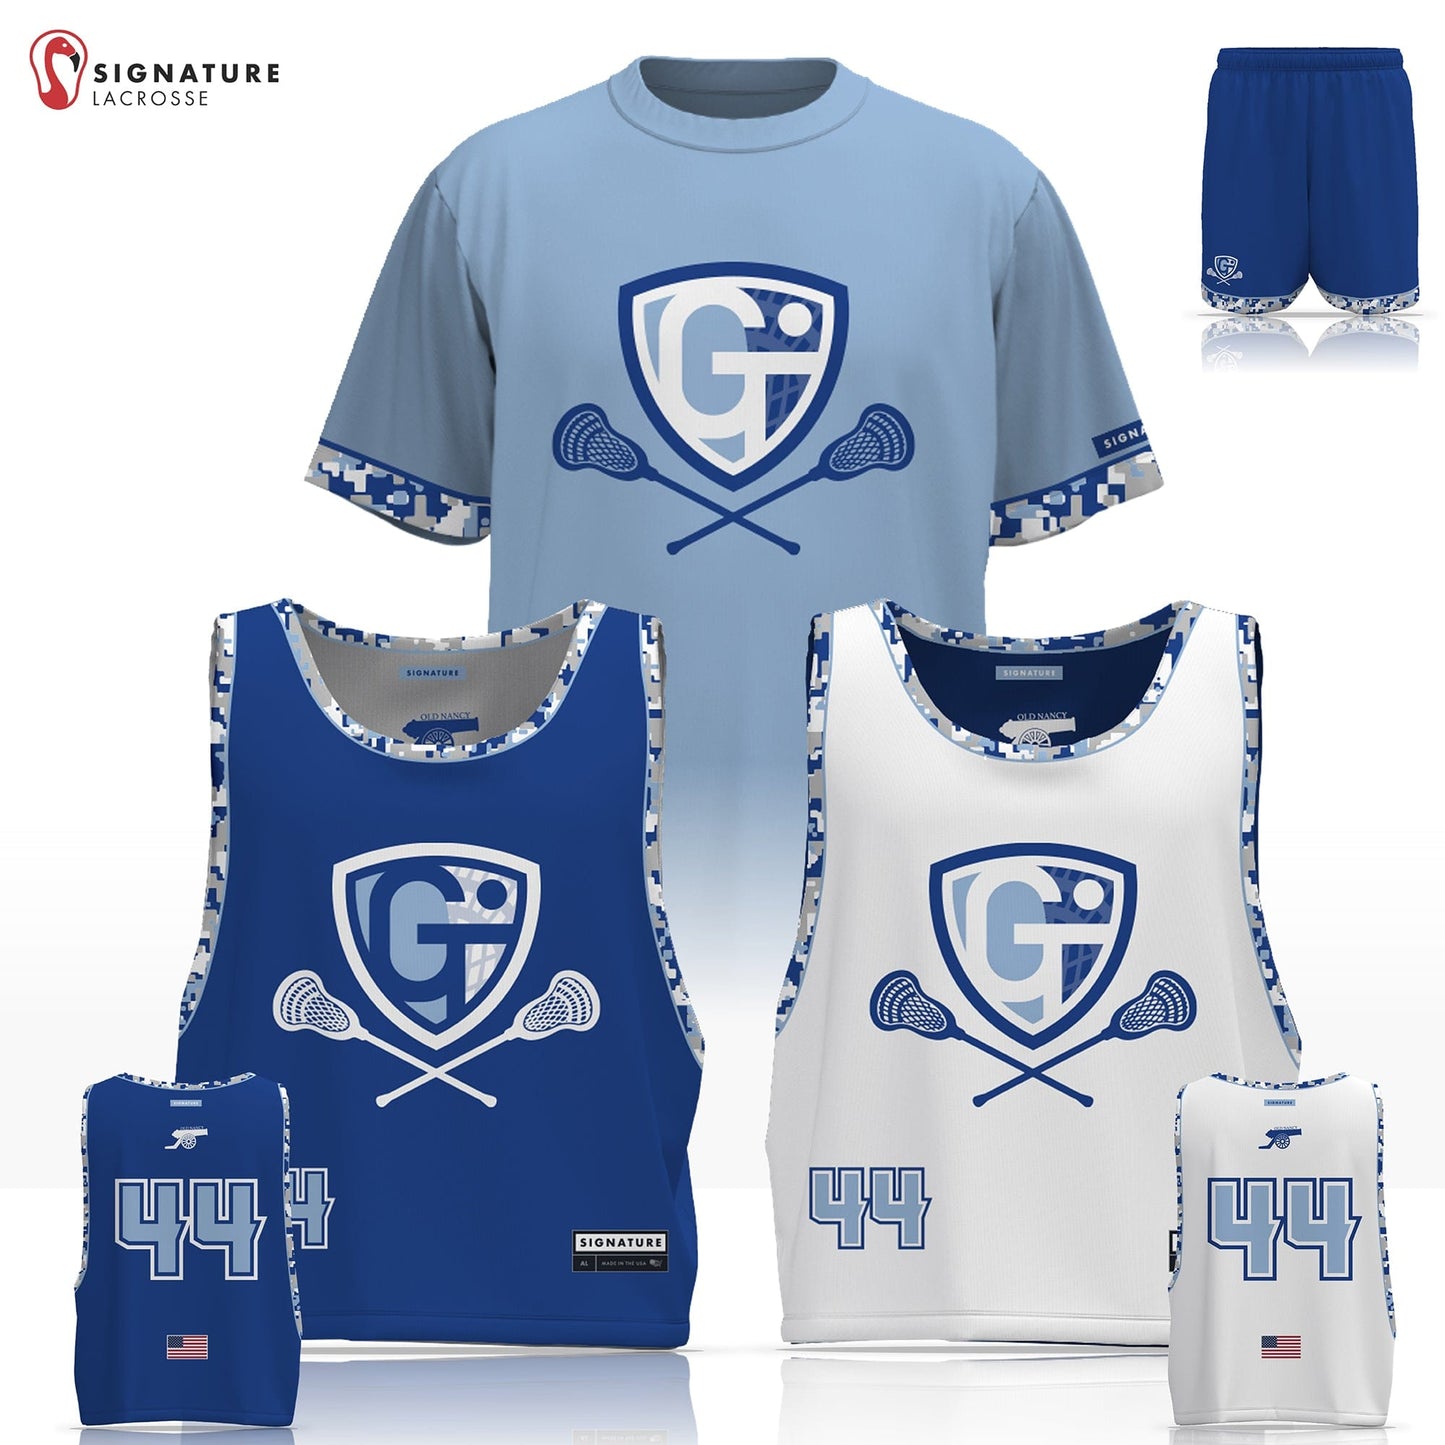 Georgetown-Triton Youth Lacrosse Men's 3 Piece Player Game Package: 3-4 Signature Lacrosse